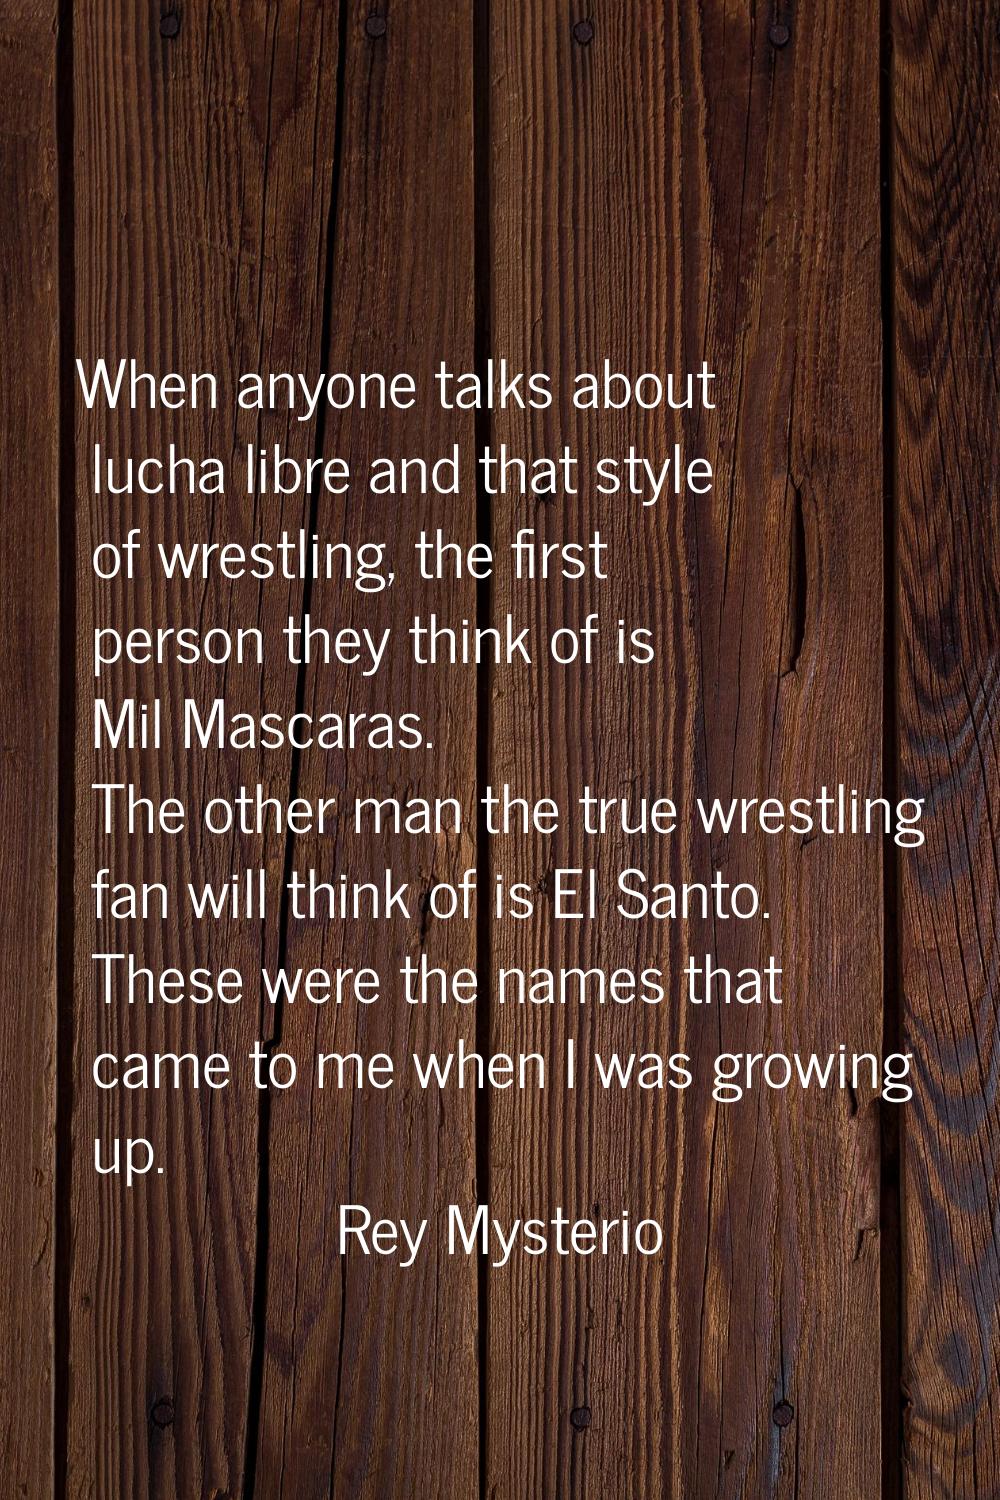 When anyone talks about lucha libre and that style of wrestling, the first person they think of is 